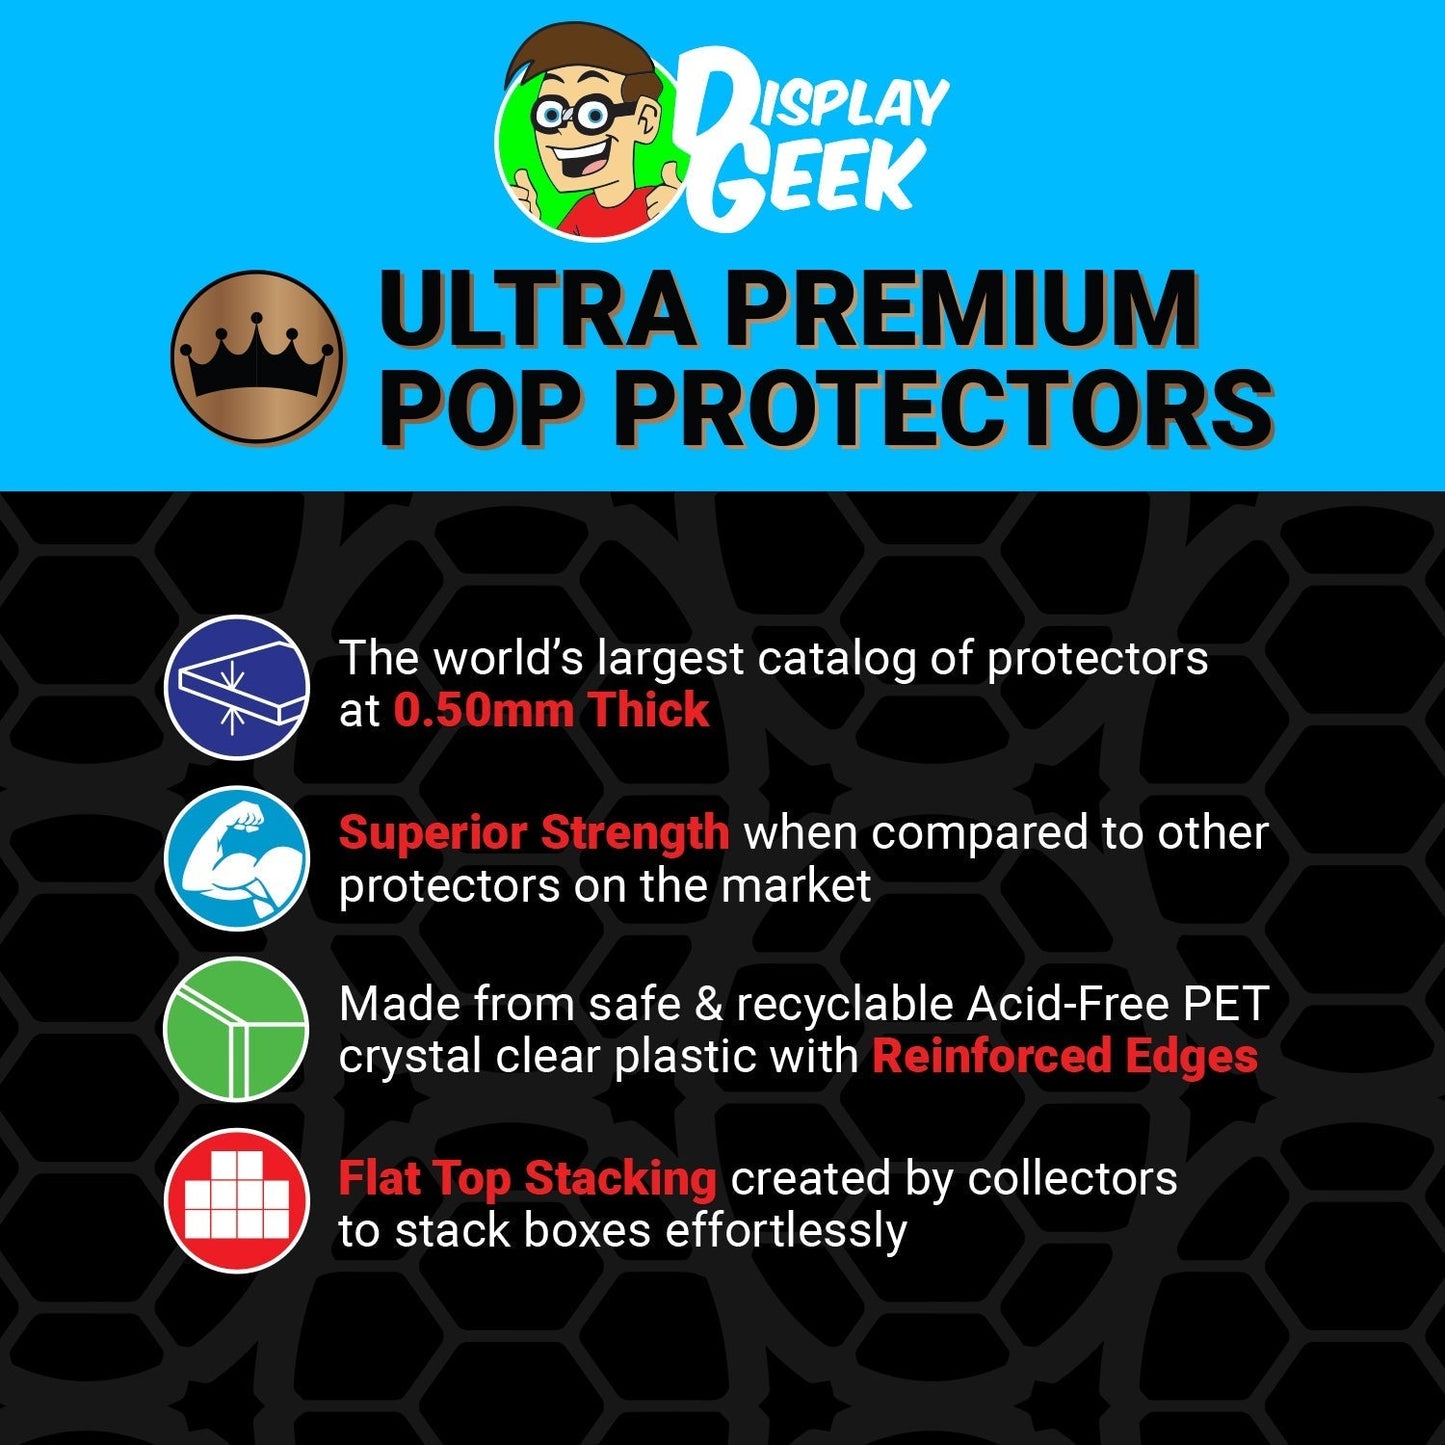 Pop Protector for Blink 182 Enema of the State #36 Funko Pop Albums Deluxe - PPG Pop Protector Guide Search Created by Display Geek